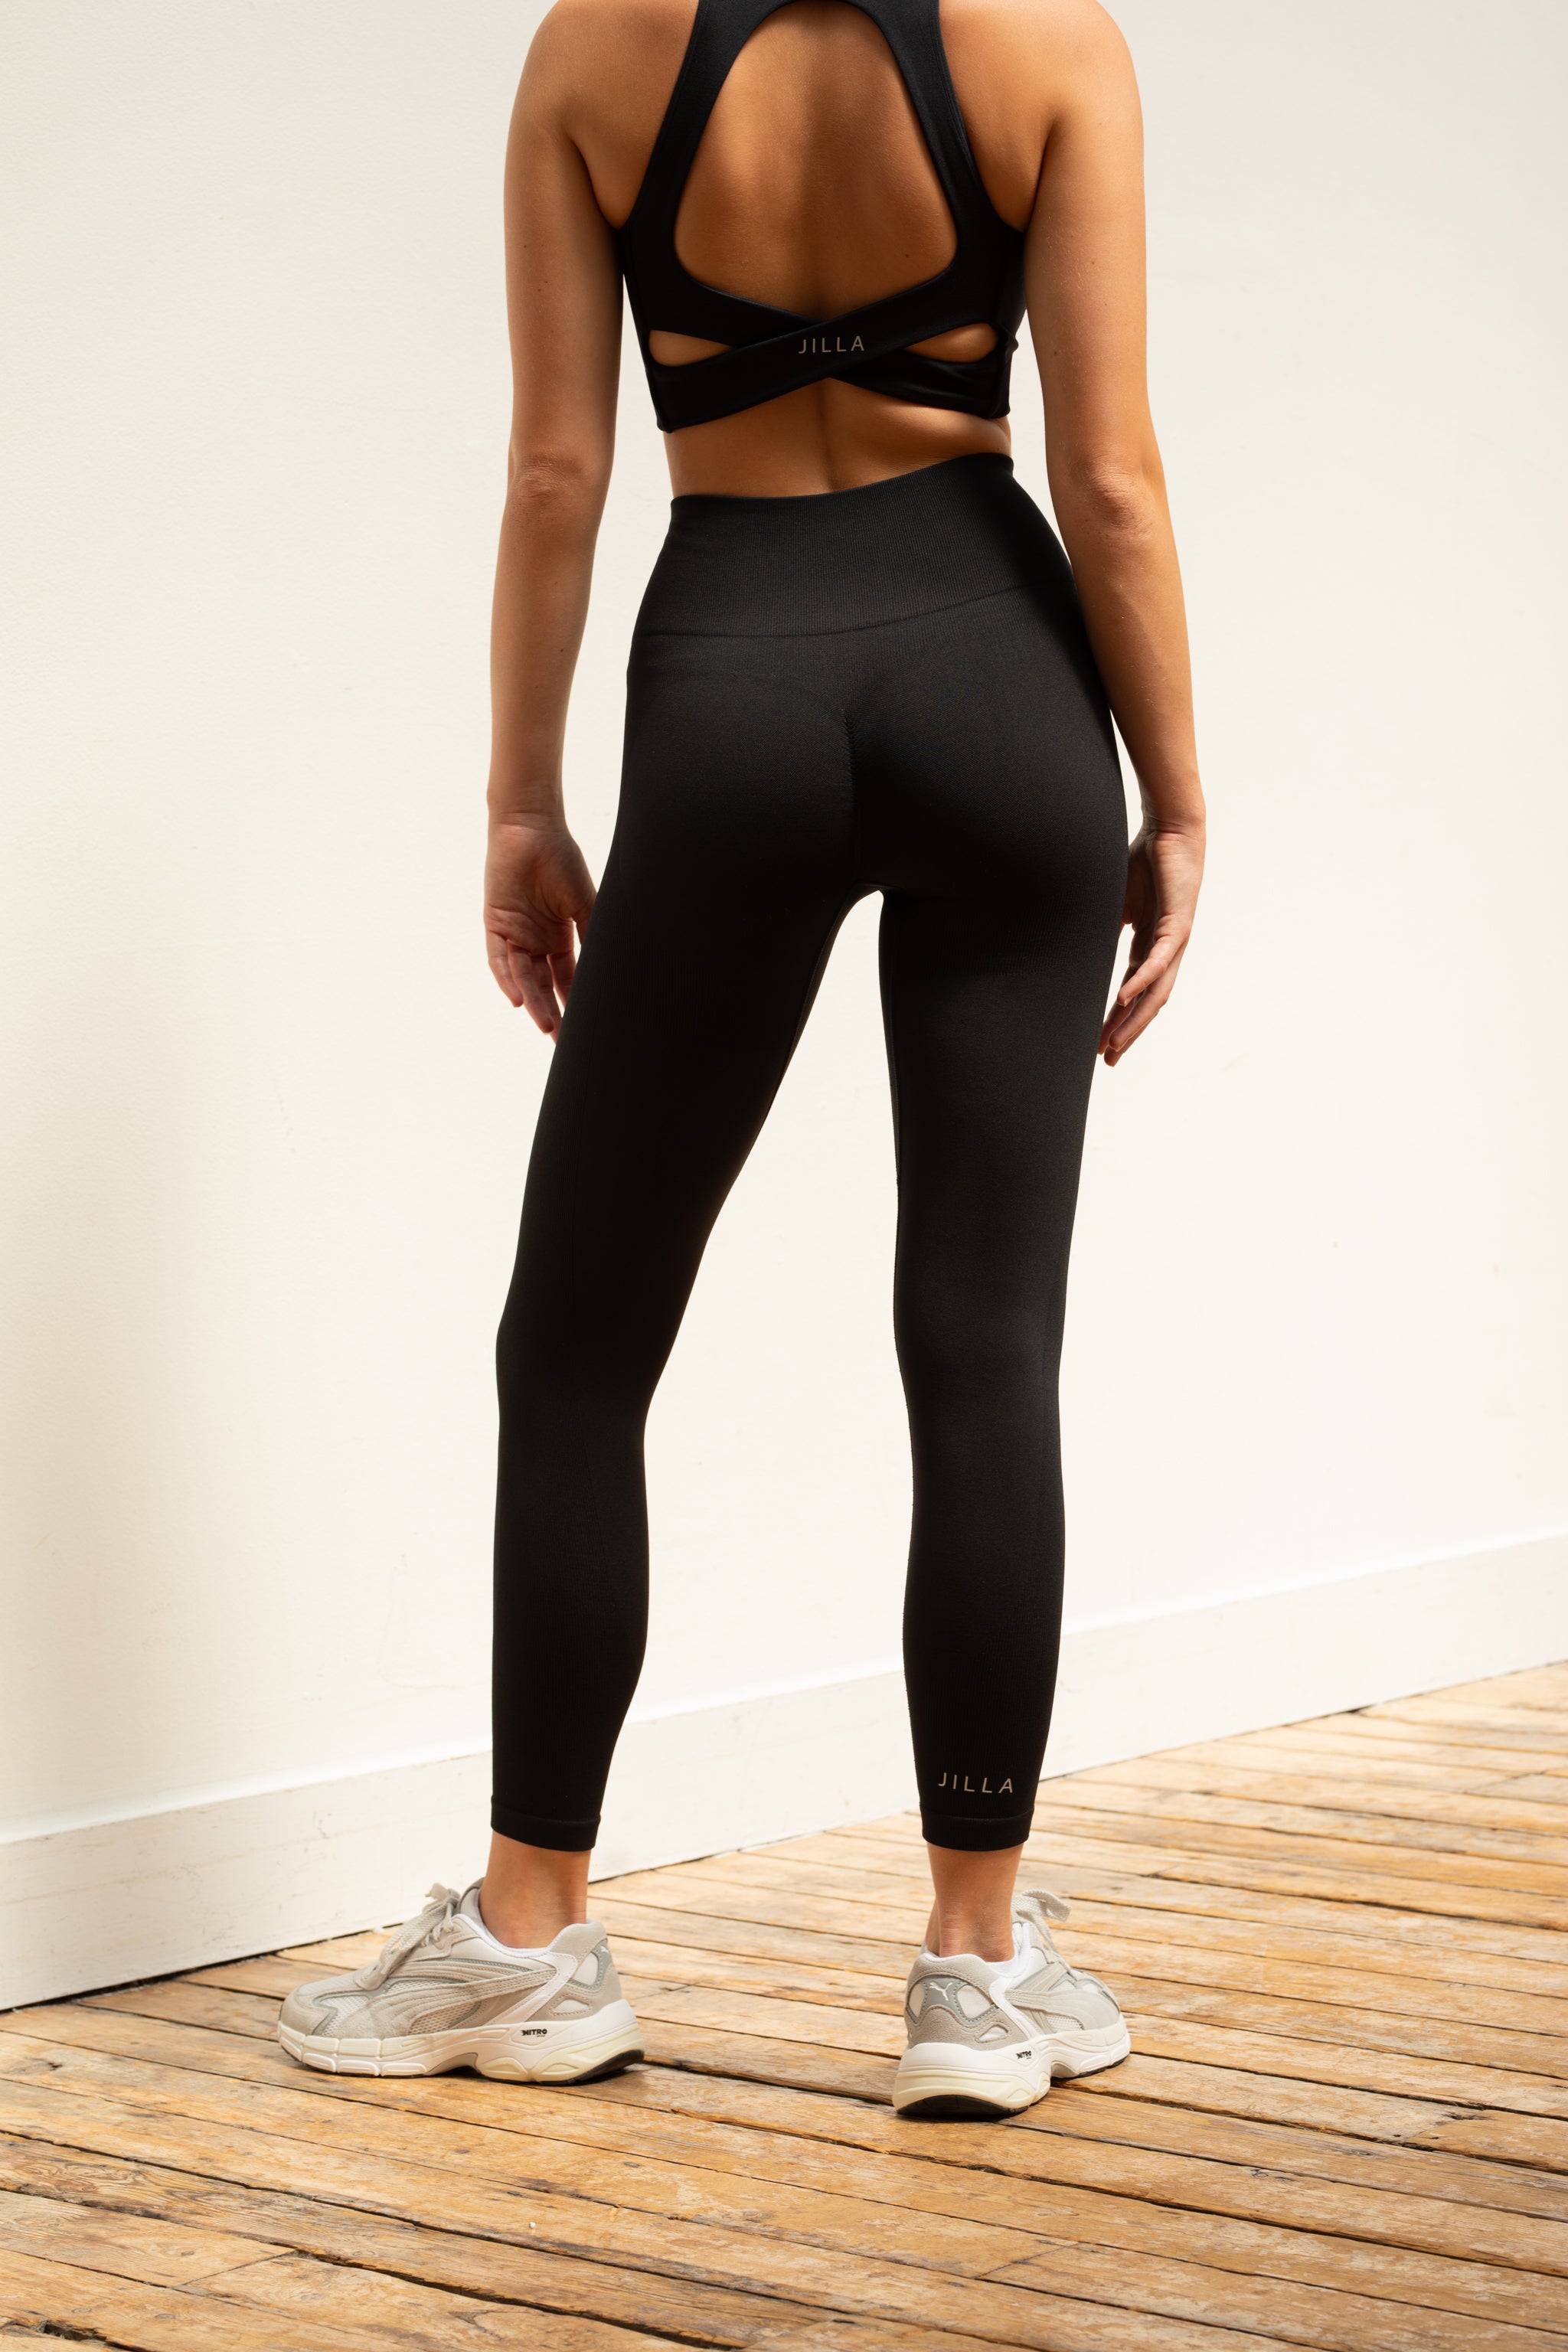 Black supportive sports bra and black recycled cropped leggings by sustainable women's activewear brand Jilla